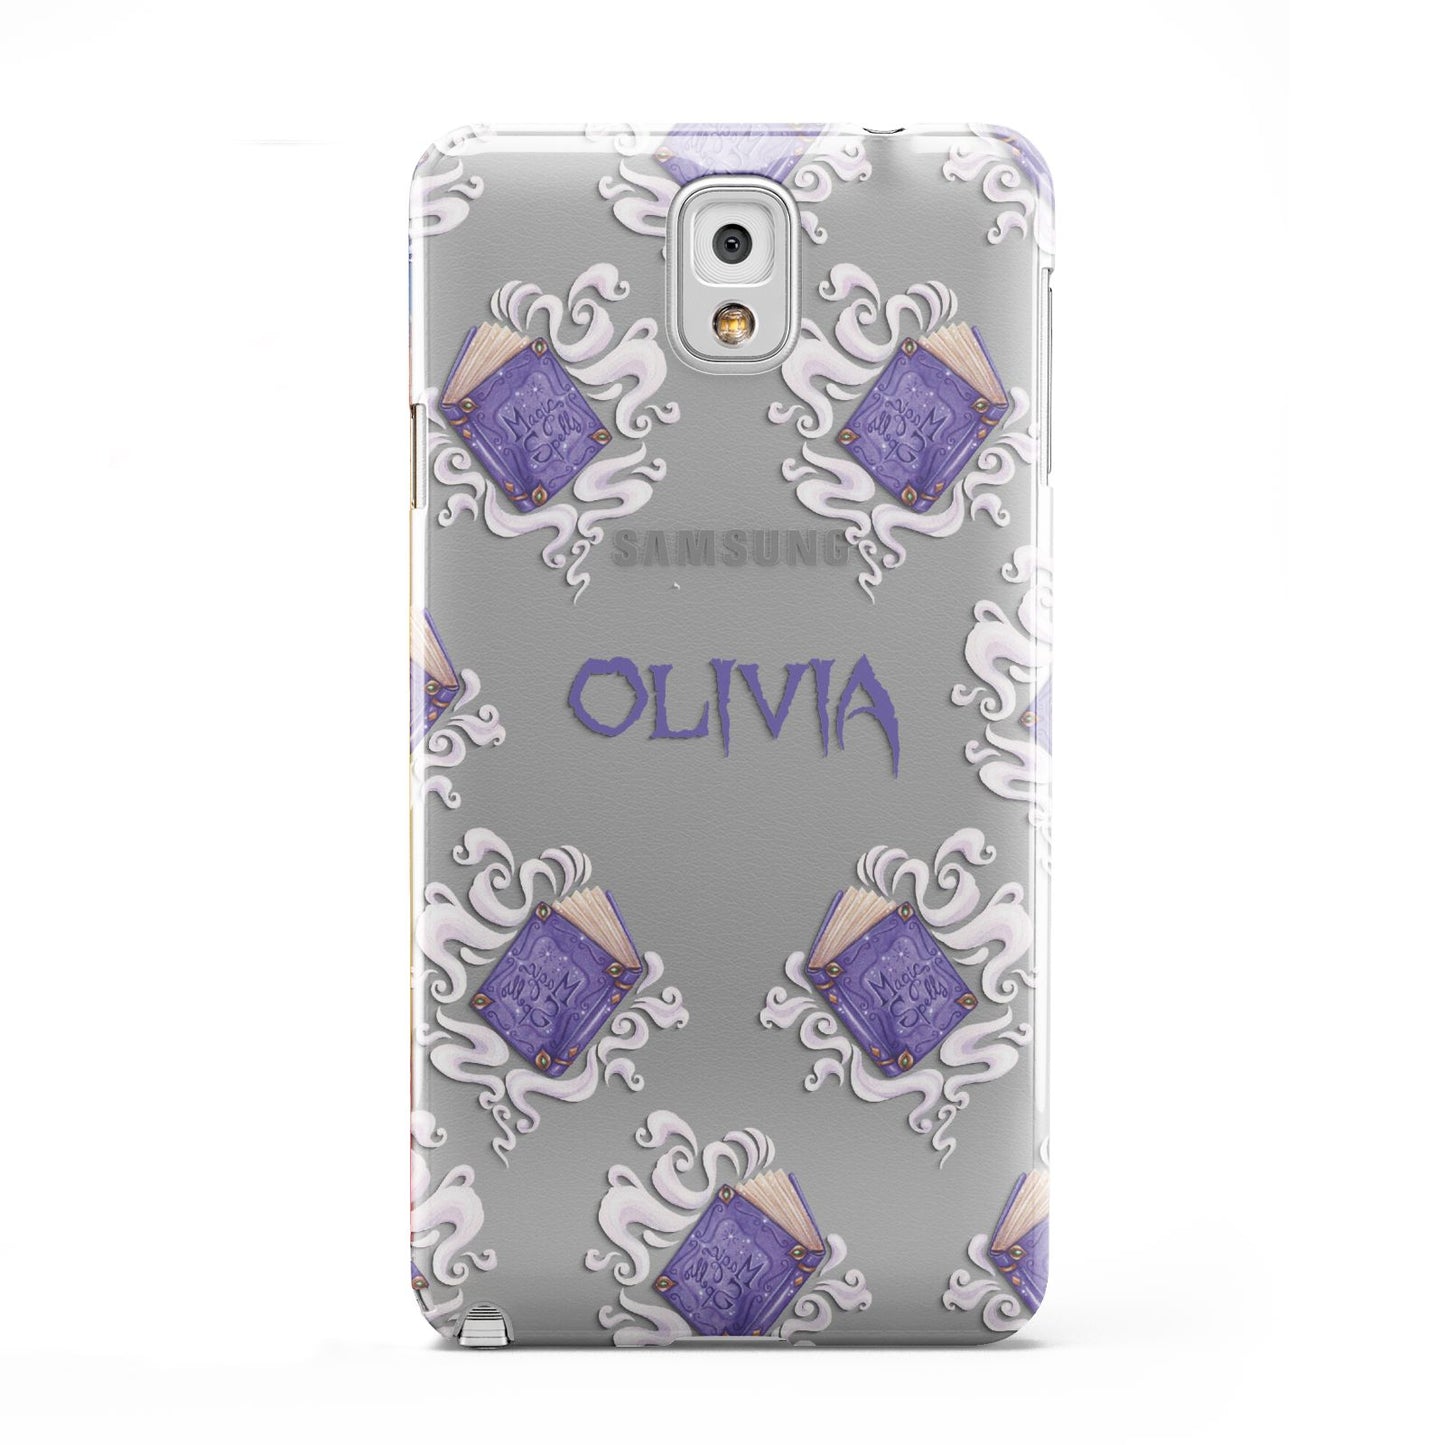 Personalised Halloween Magic Spell Samsung Galaxy Note 3 Case